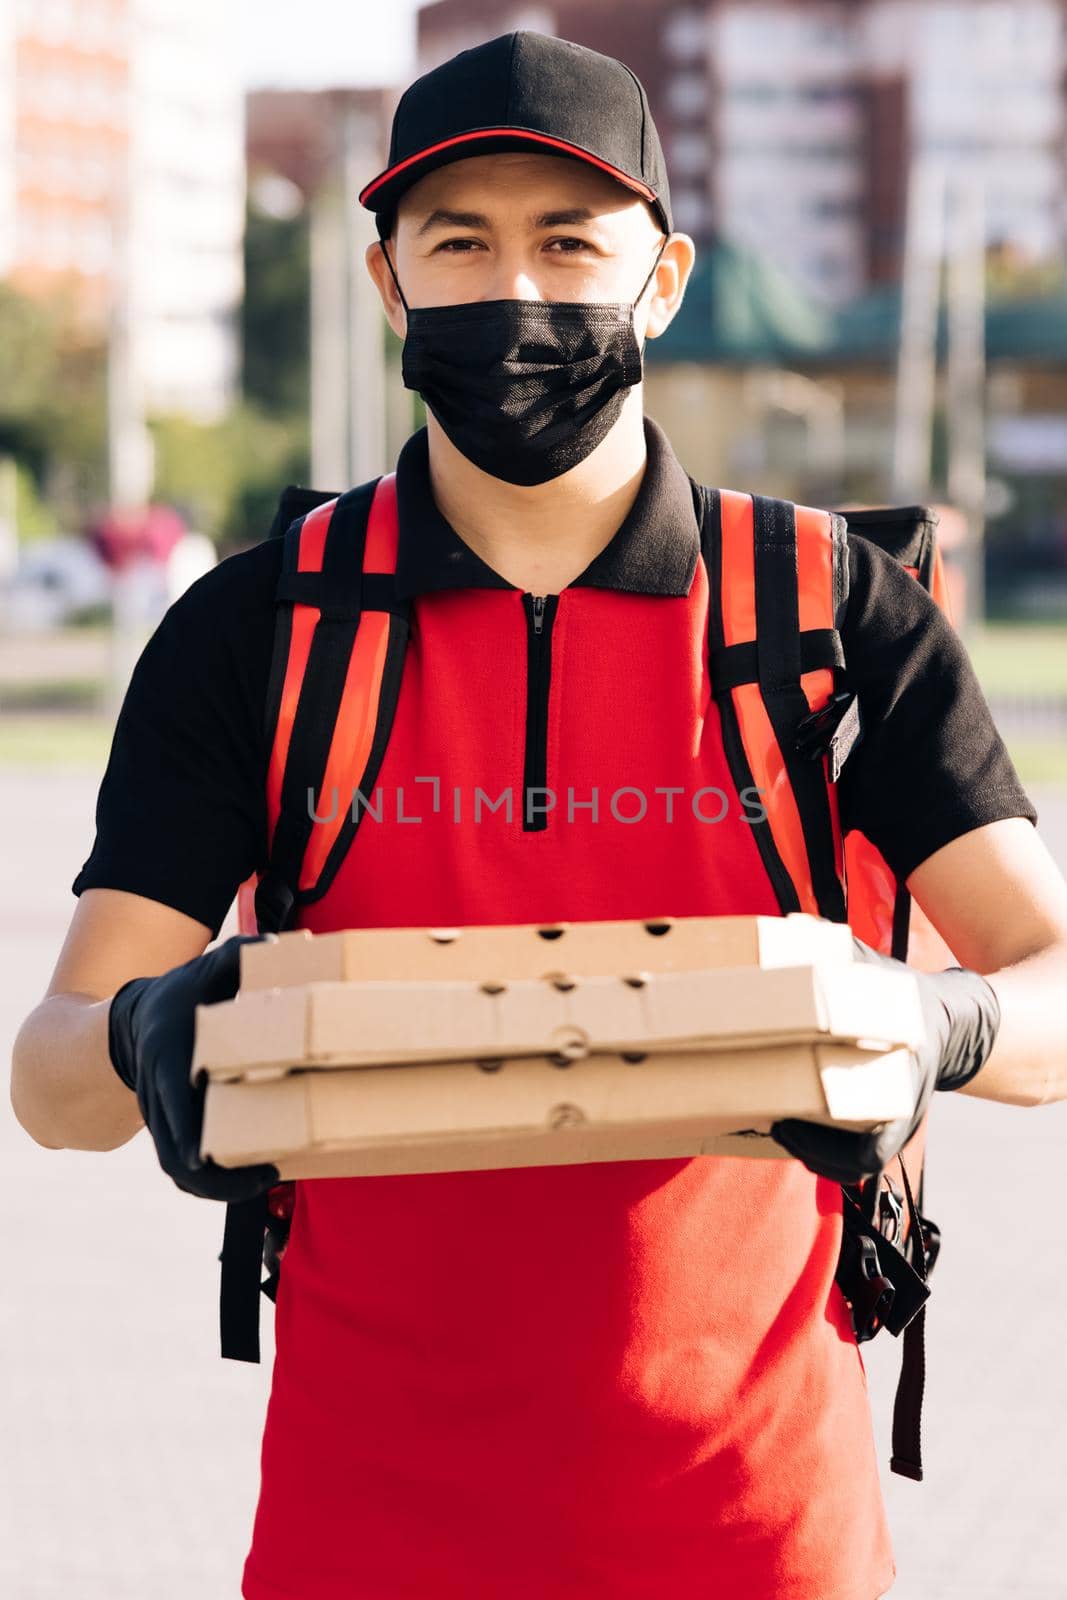 Portrait of courier delivery man with red backpack holding pizza in carton boxes, wearing protective face mask and gloves. Delivery services. Excellent delivery.